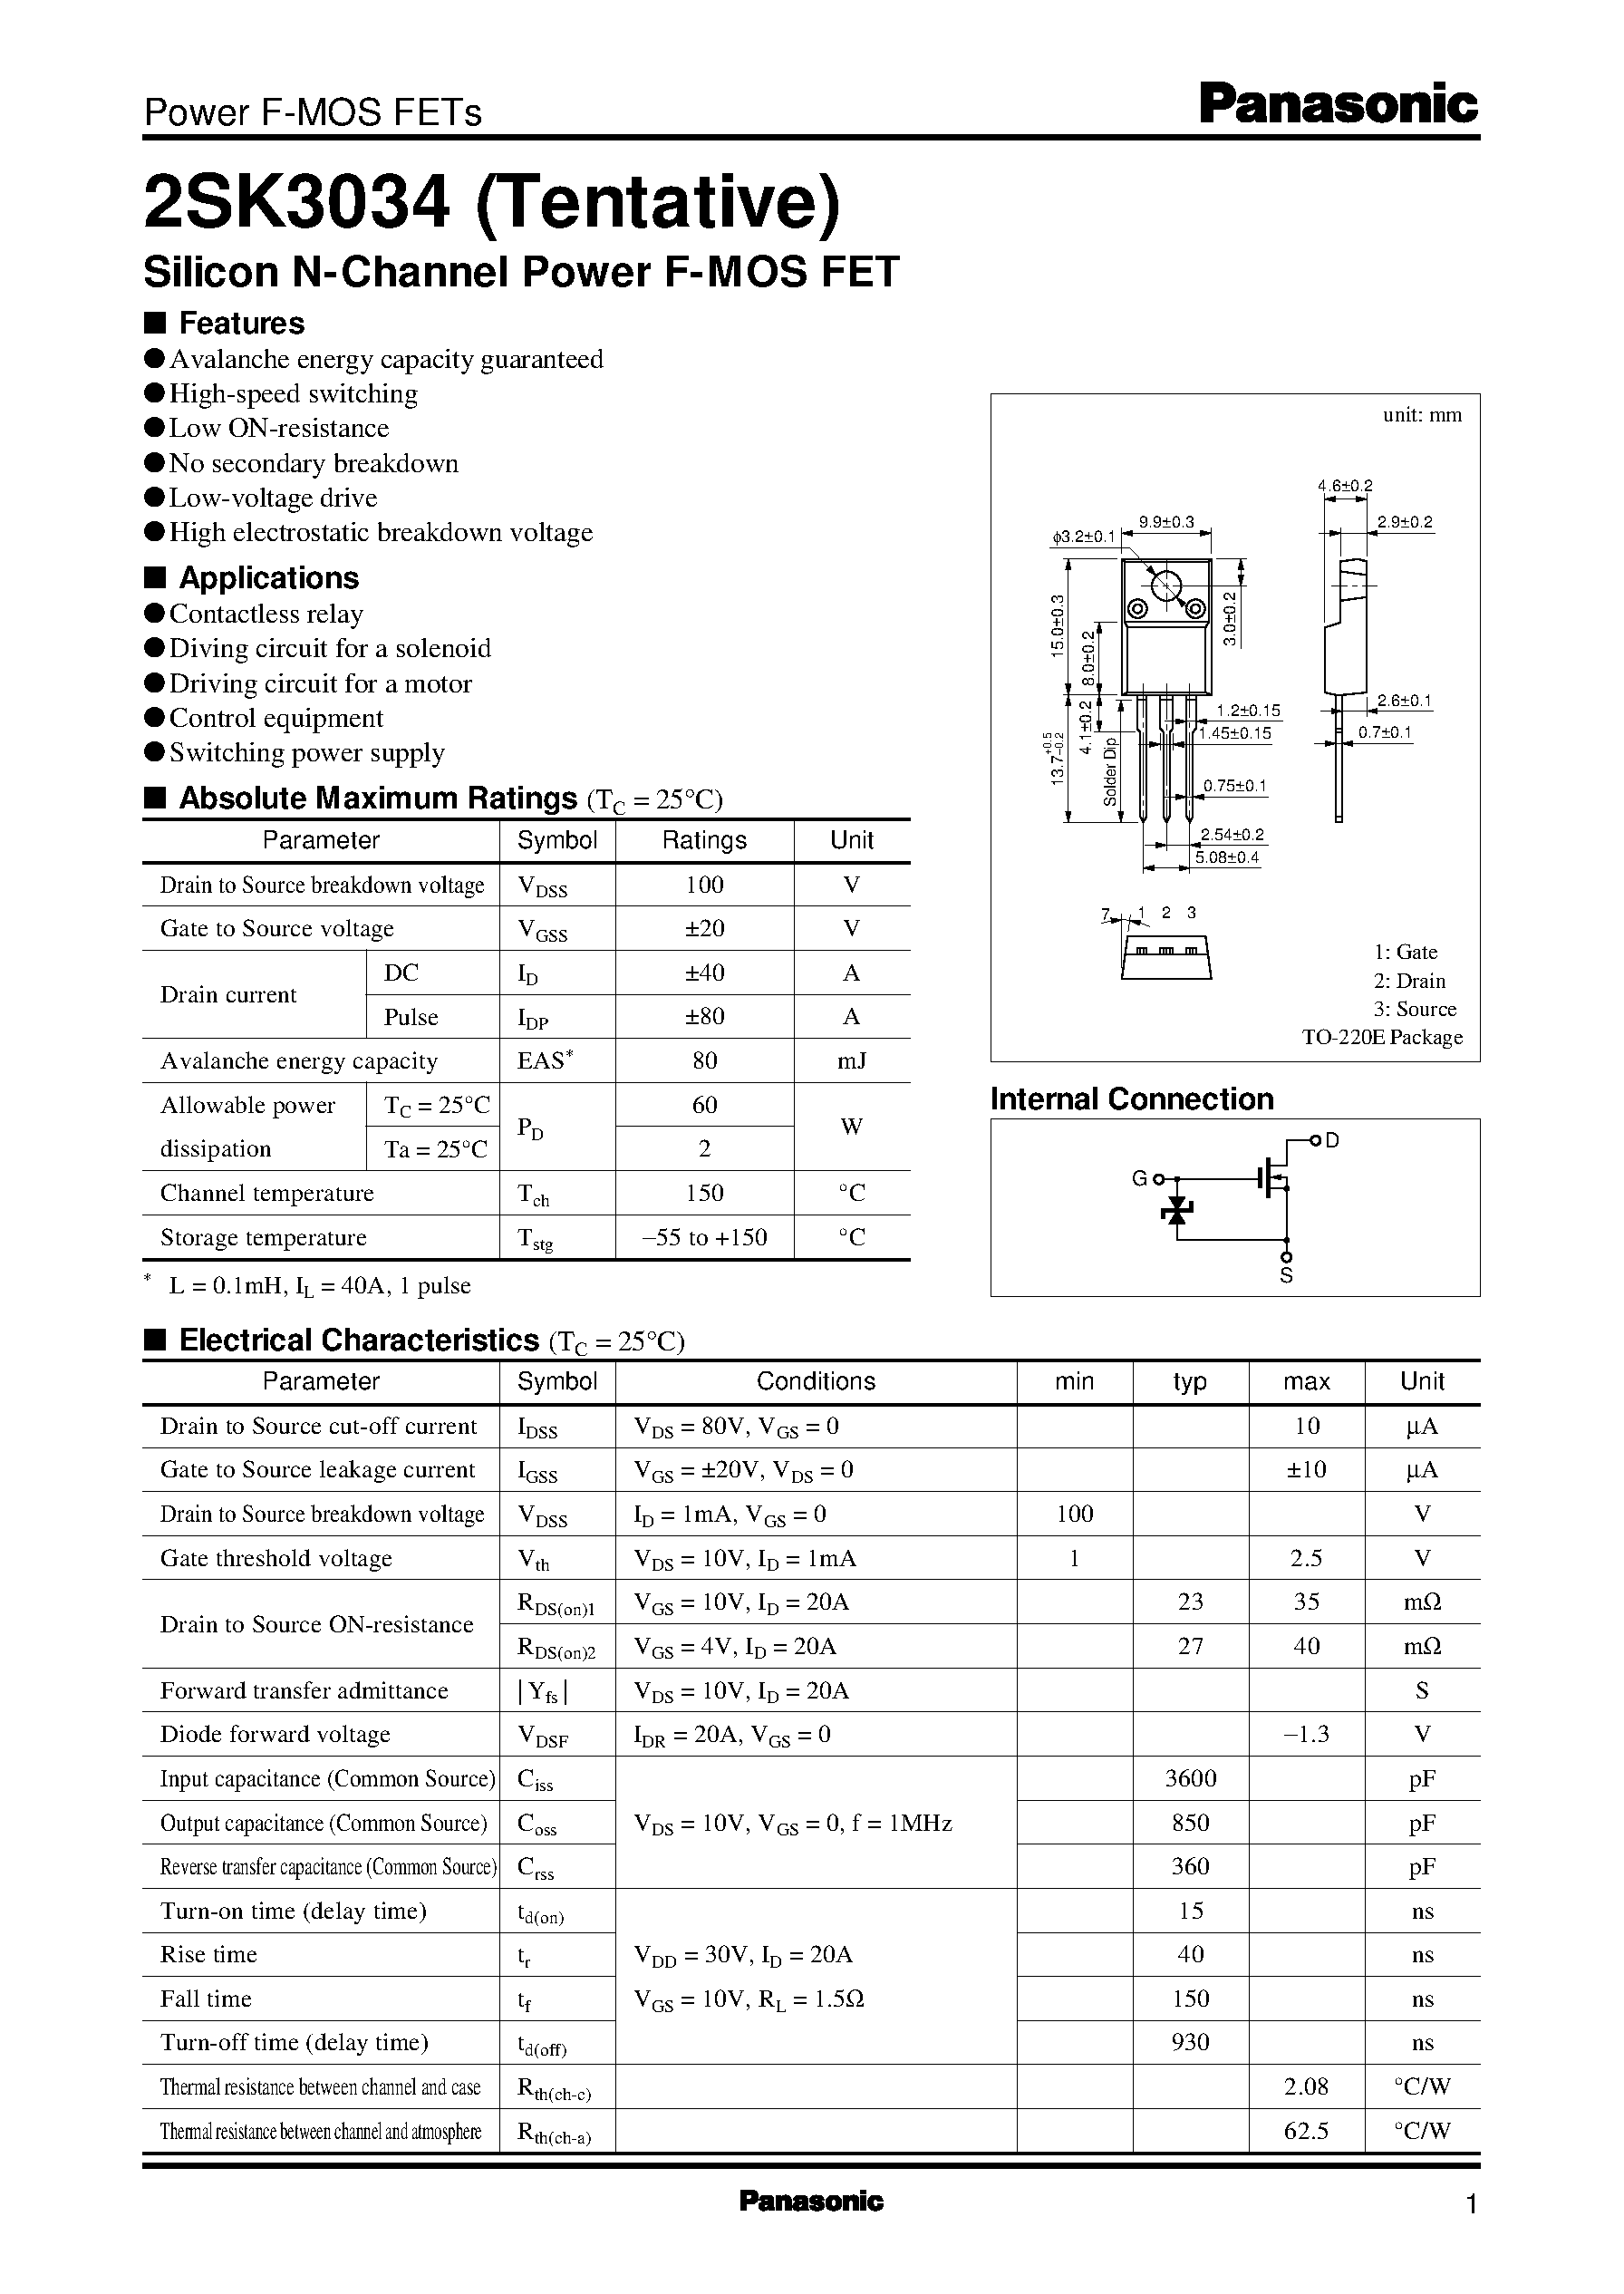 Datasheet 2SK3034 - Silicon N-Channel Power F-MOS FET page 1